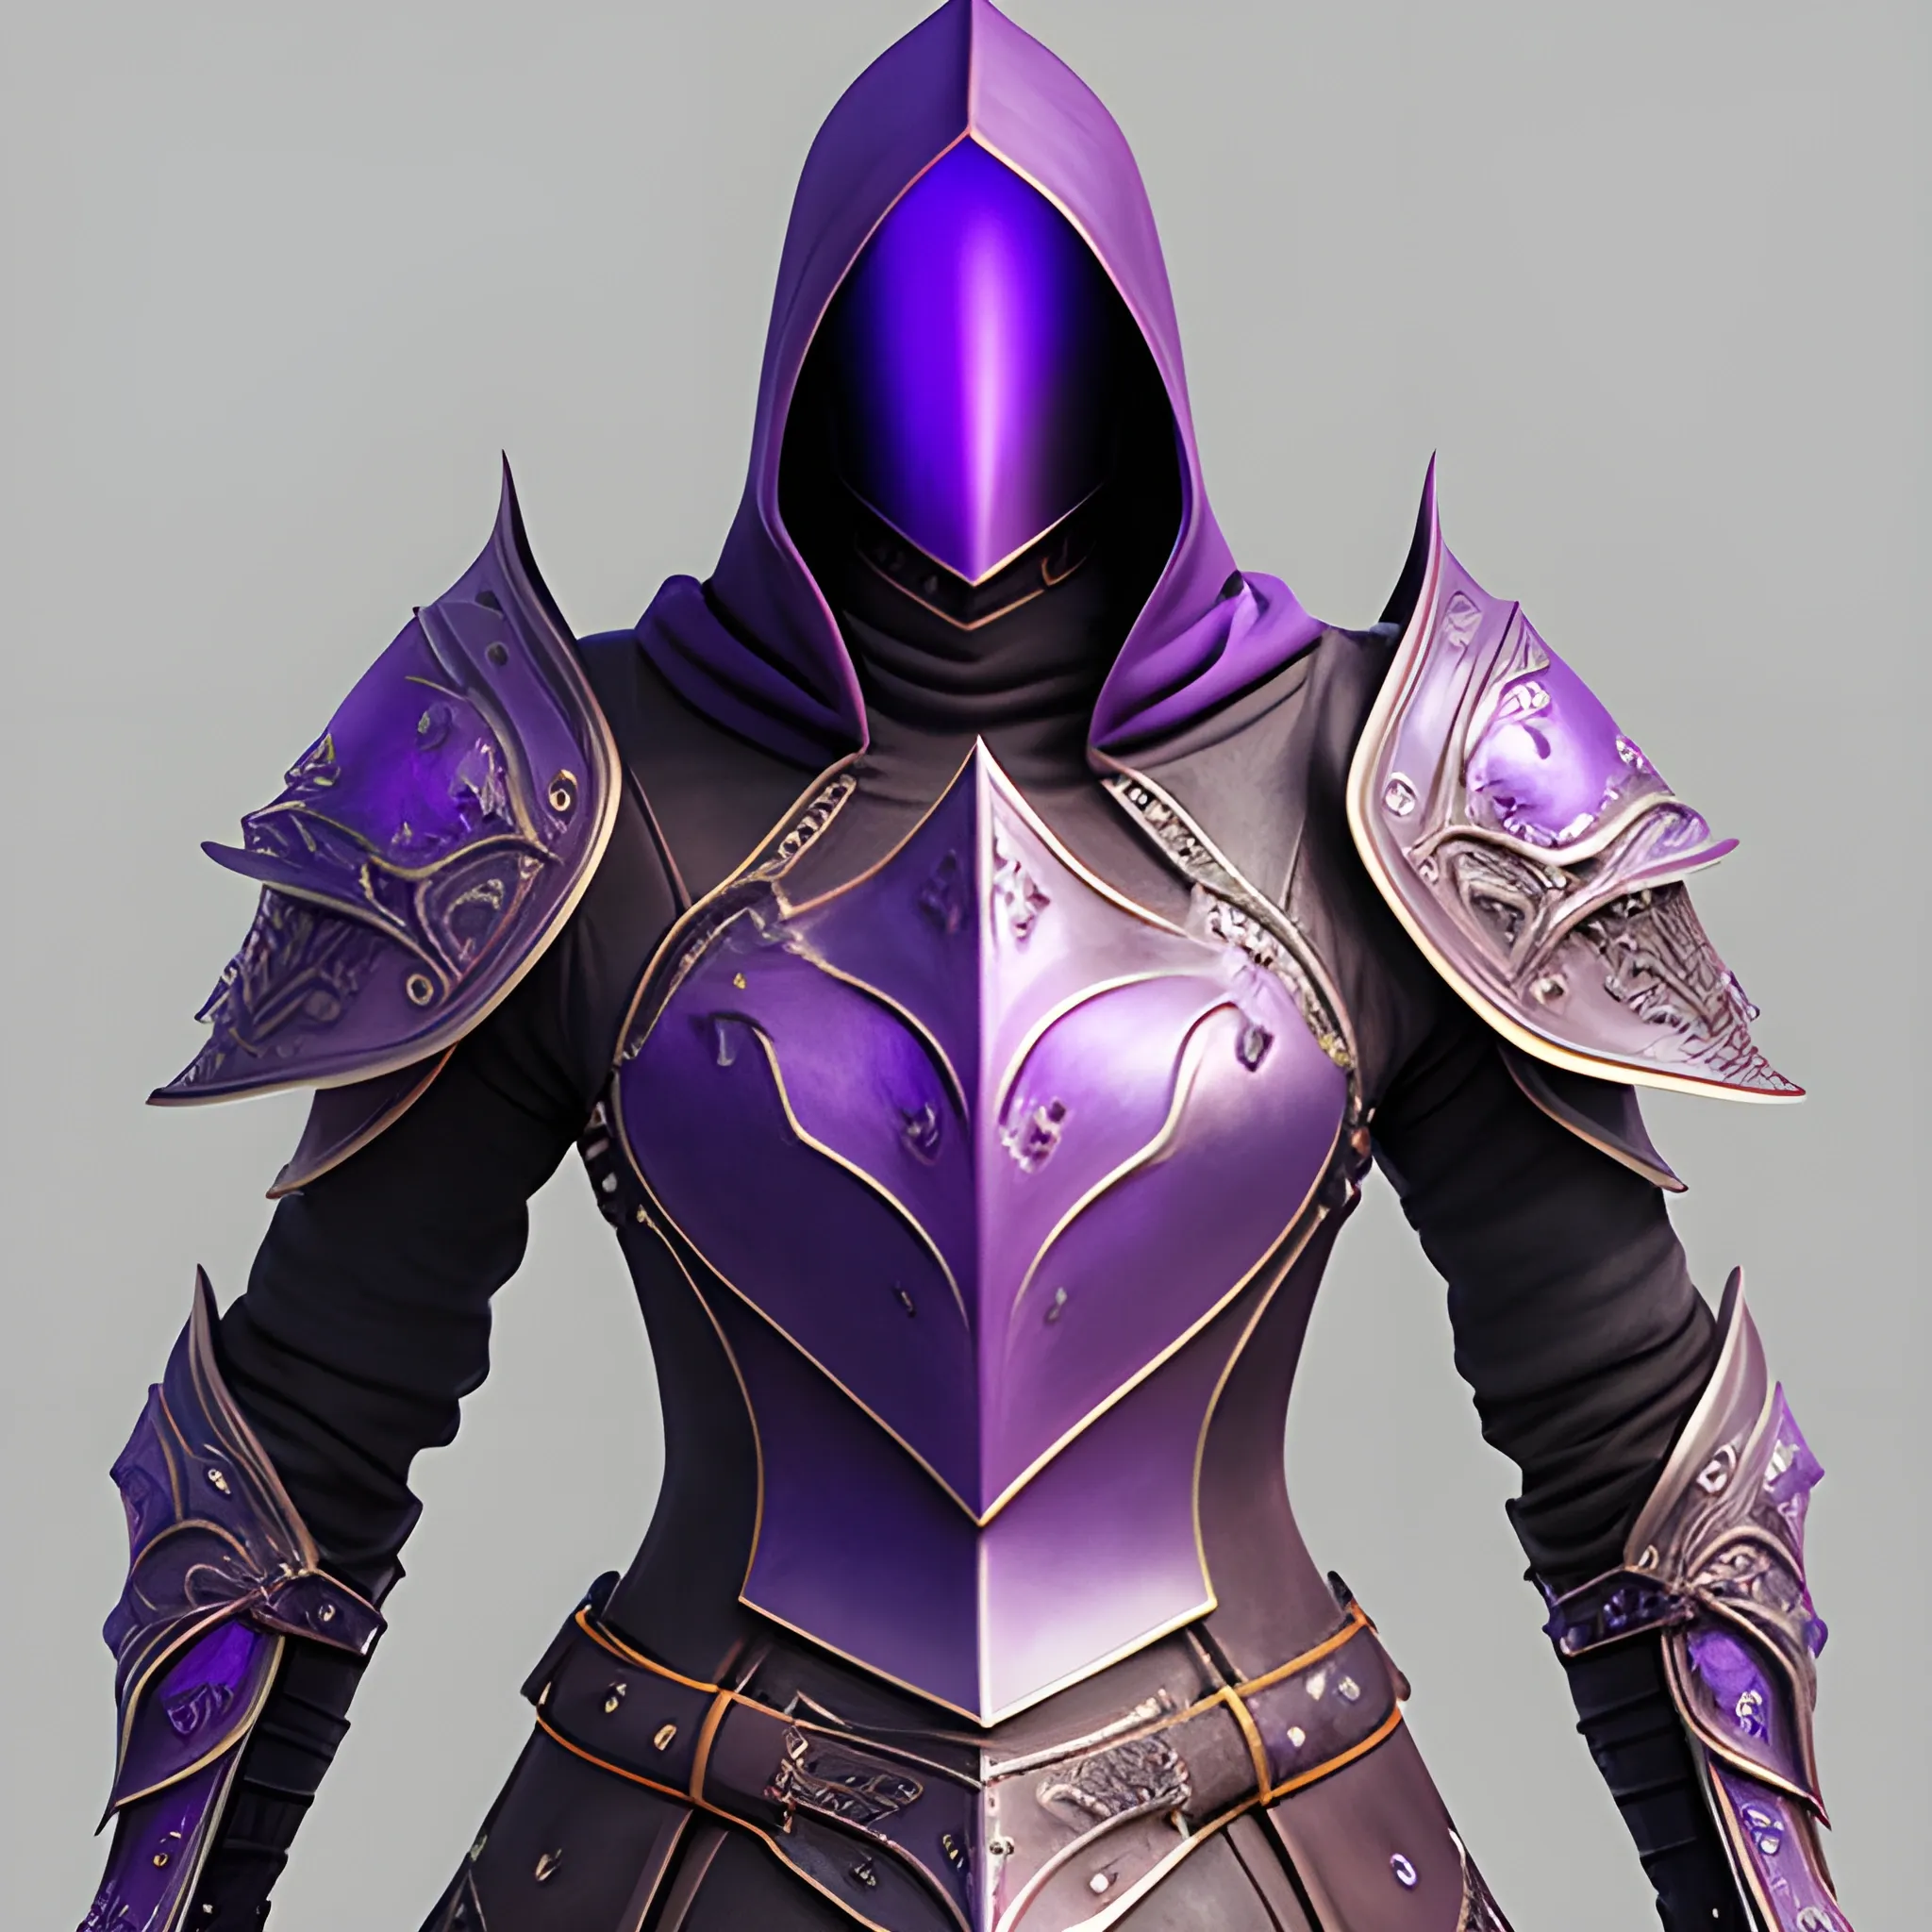 Premium Photo  Ethereal Elegance A Shimmering Encounter of Purple and  Black Studded Leather Armor on a Serene Whit